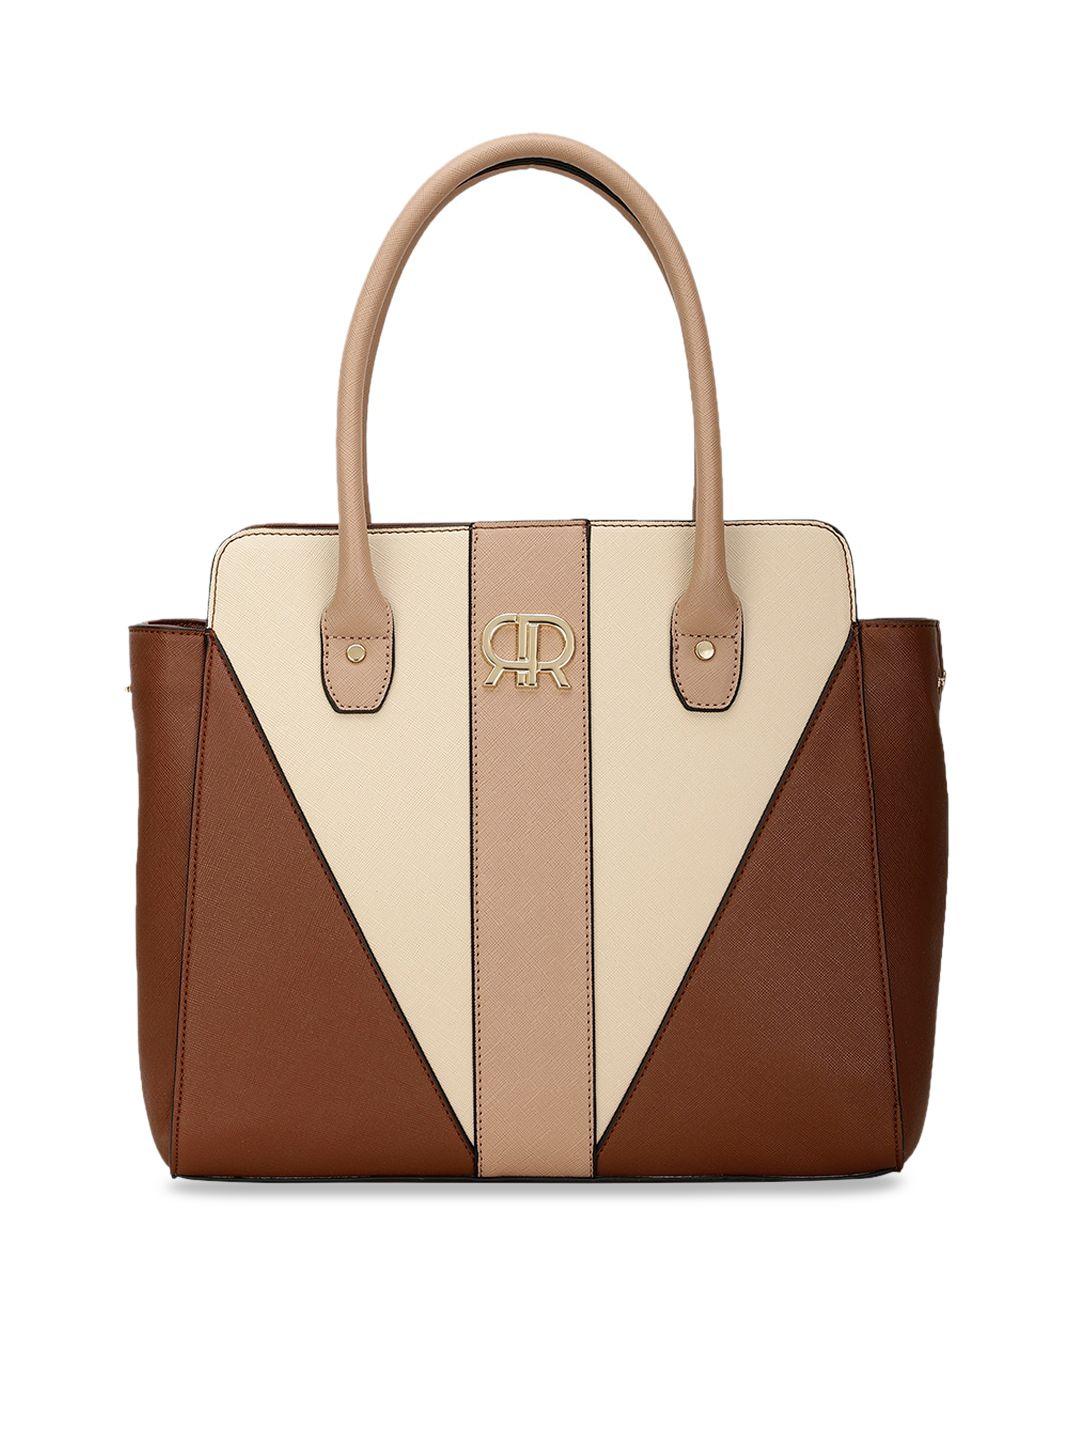 marie claire brown colourblocked structured shoulder bag